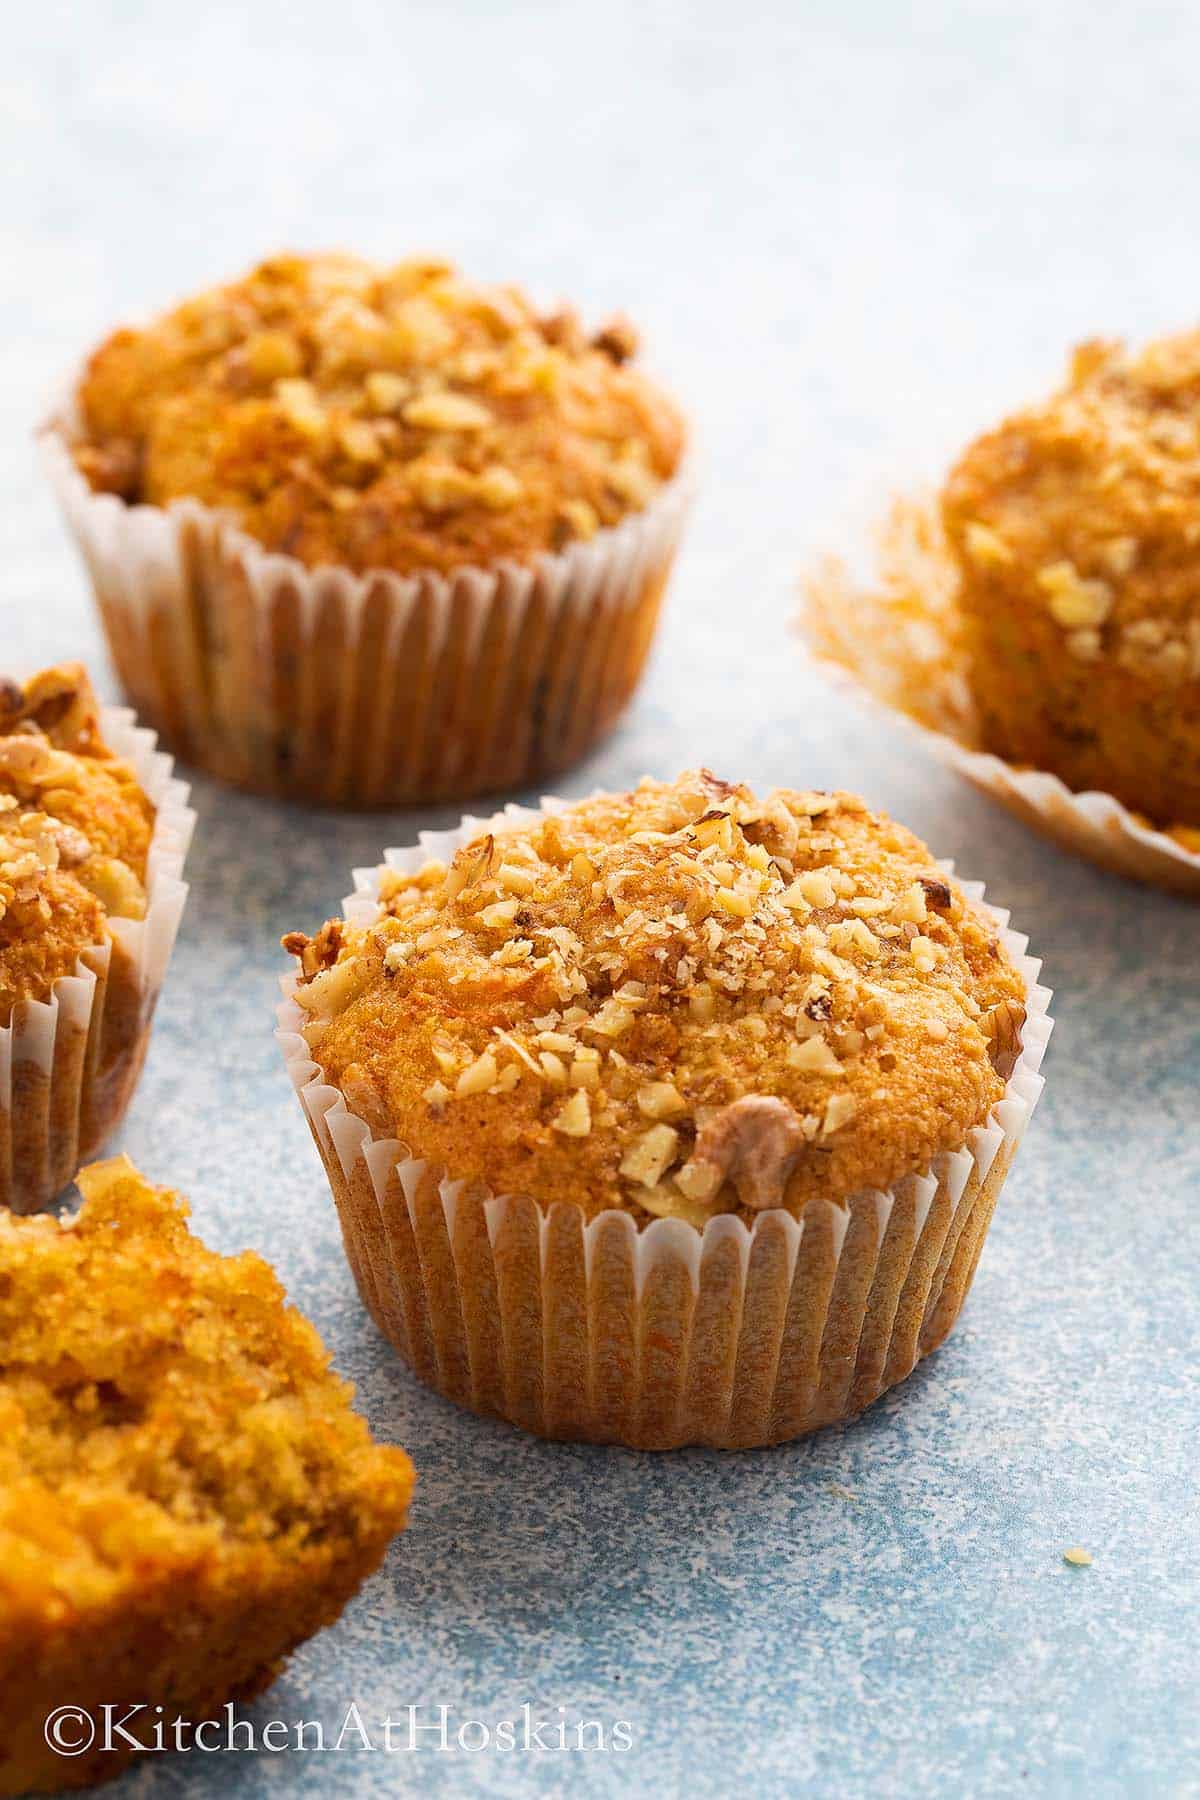 4 carrot muffins on a blue board.